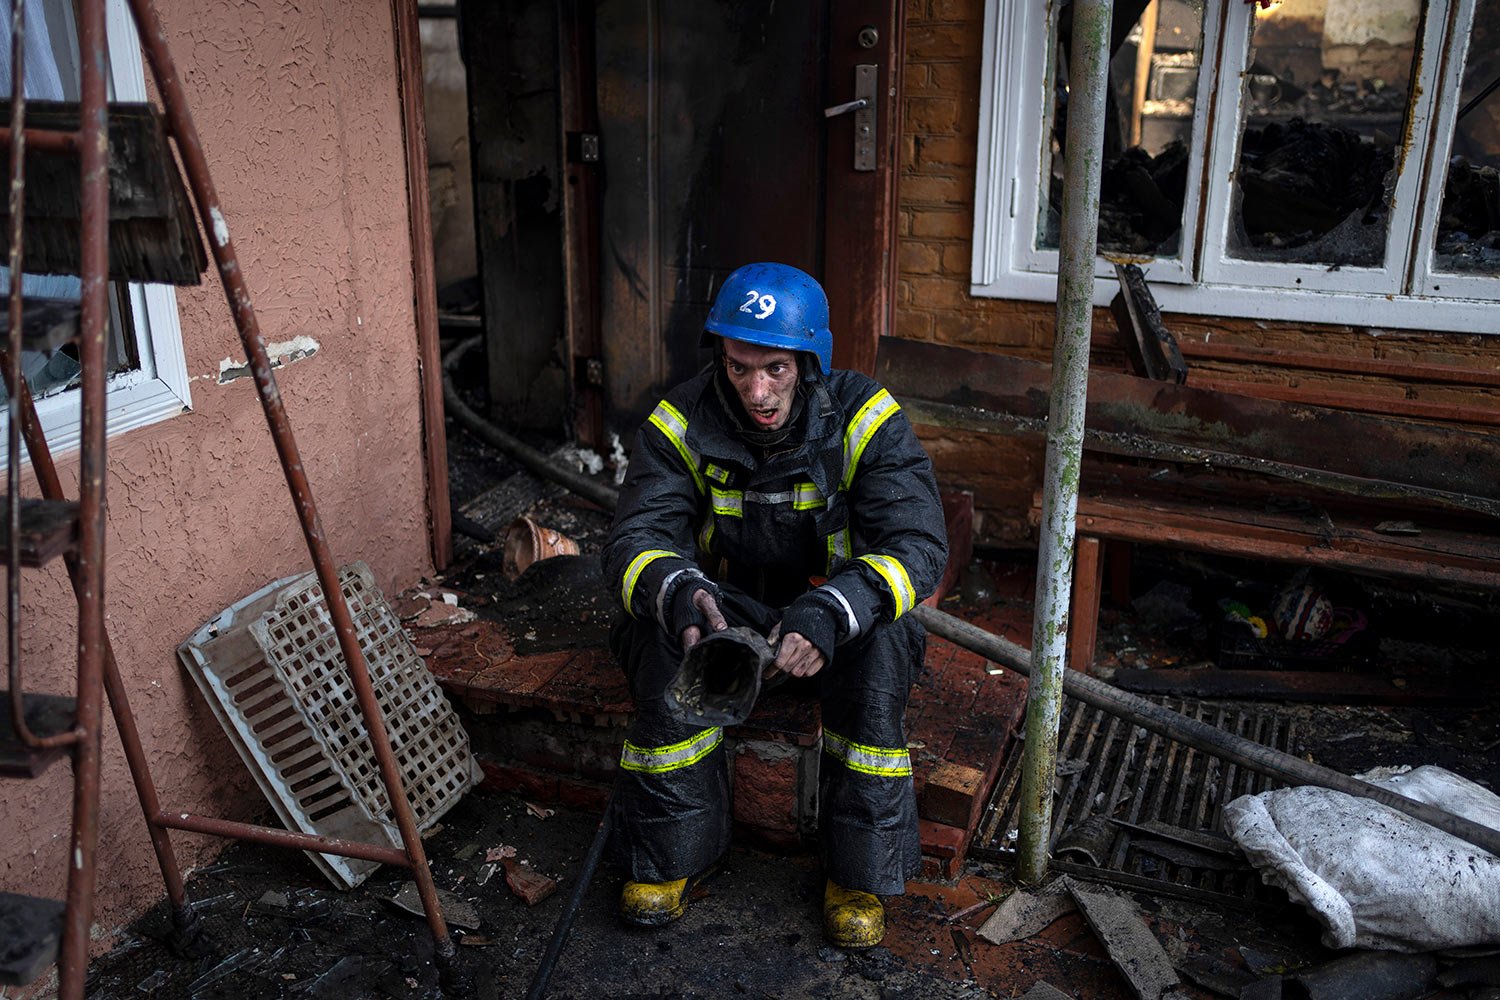  A Ukrainian firefighter takes a break from extinguishing a fire inside a house destroyed by shelling in Kyiv, Ukraine, Wednesday, March 23, 2022. (AP Photo/Rodrigo Abd) 